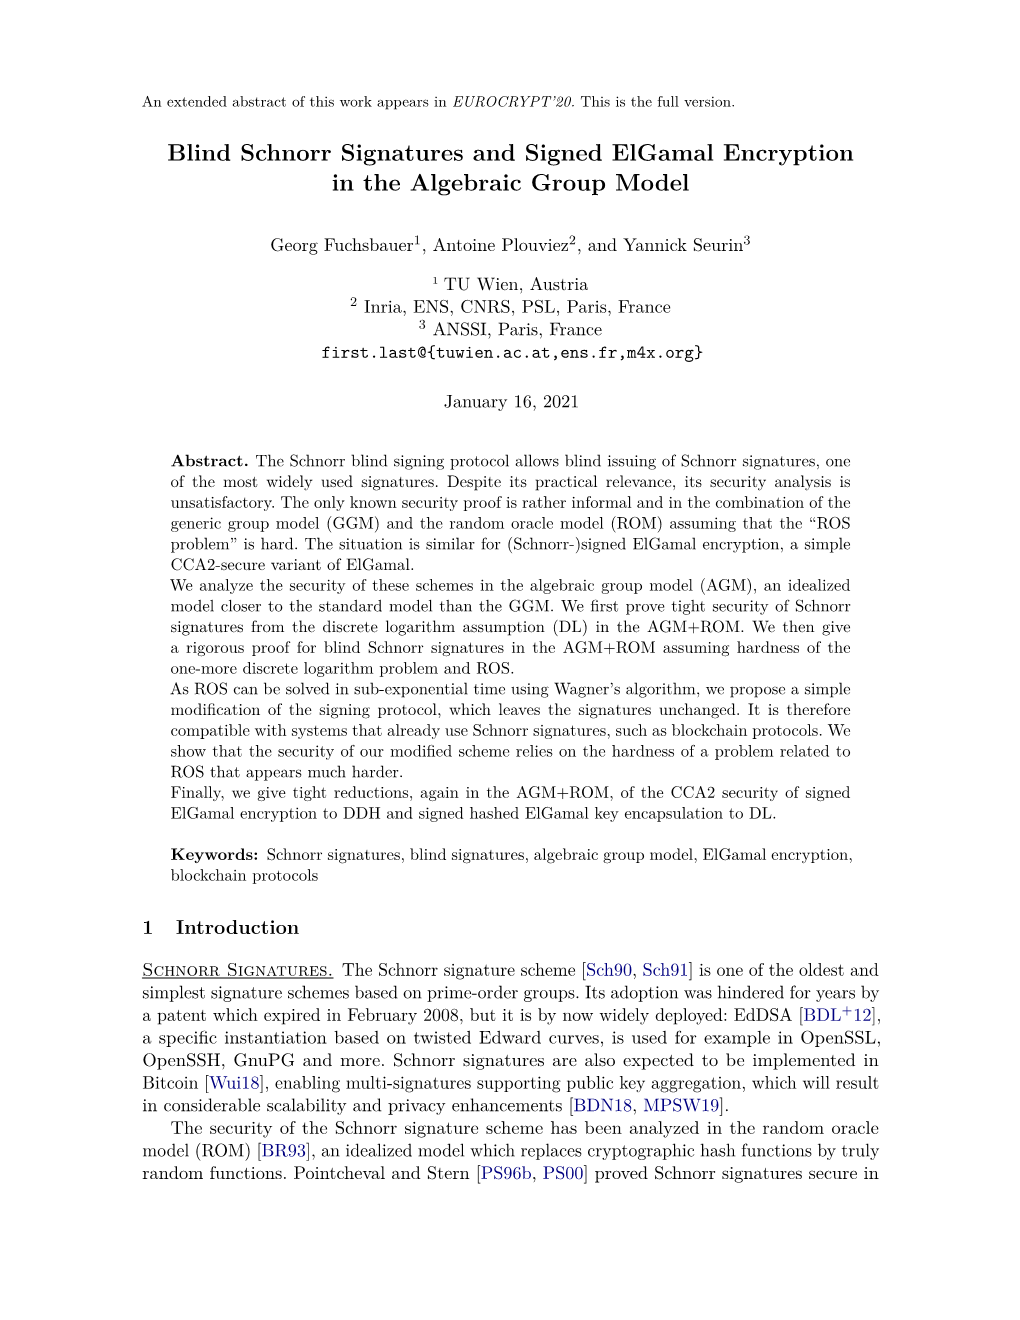 Blind Schnorr Signatures in the Algebraic Group Model